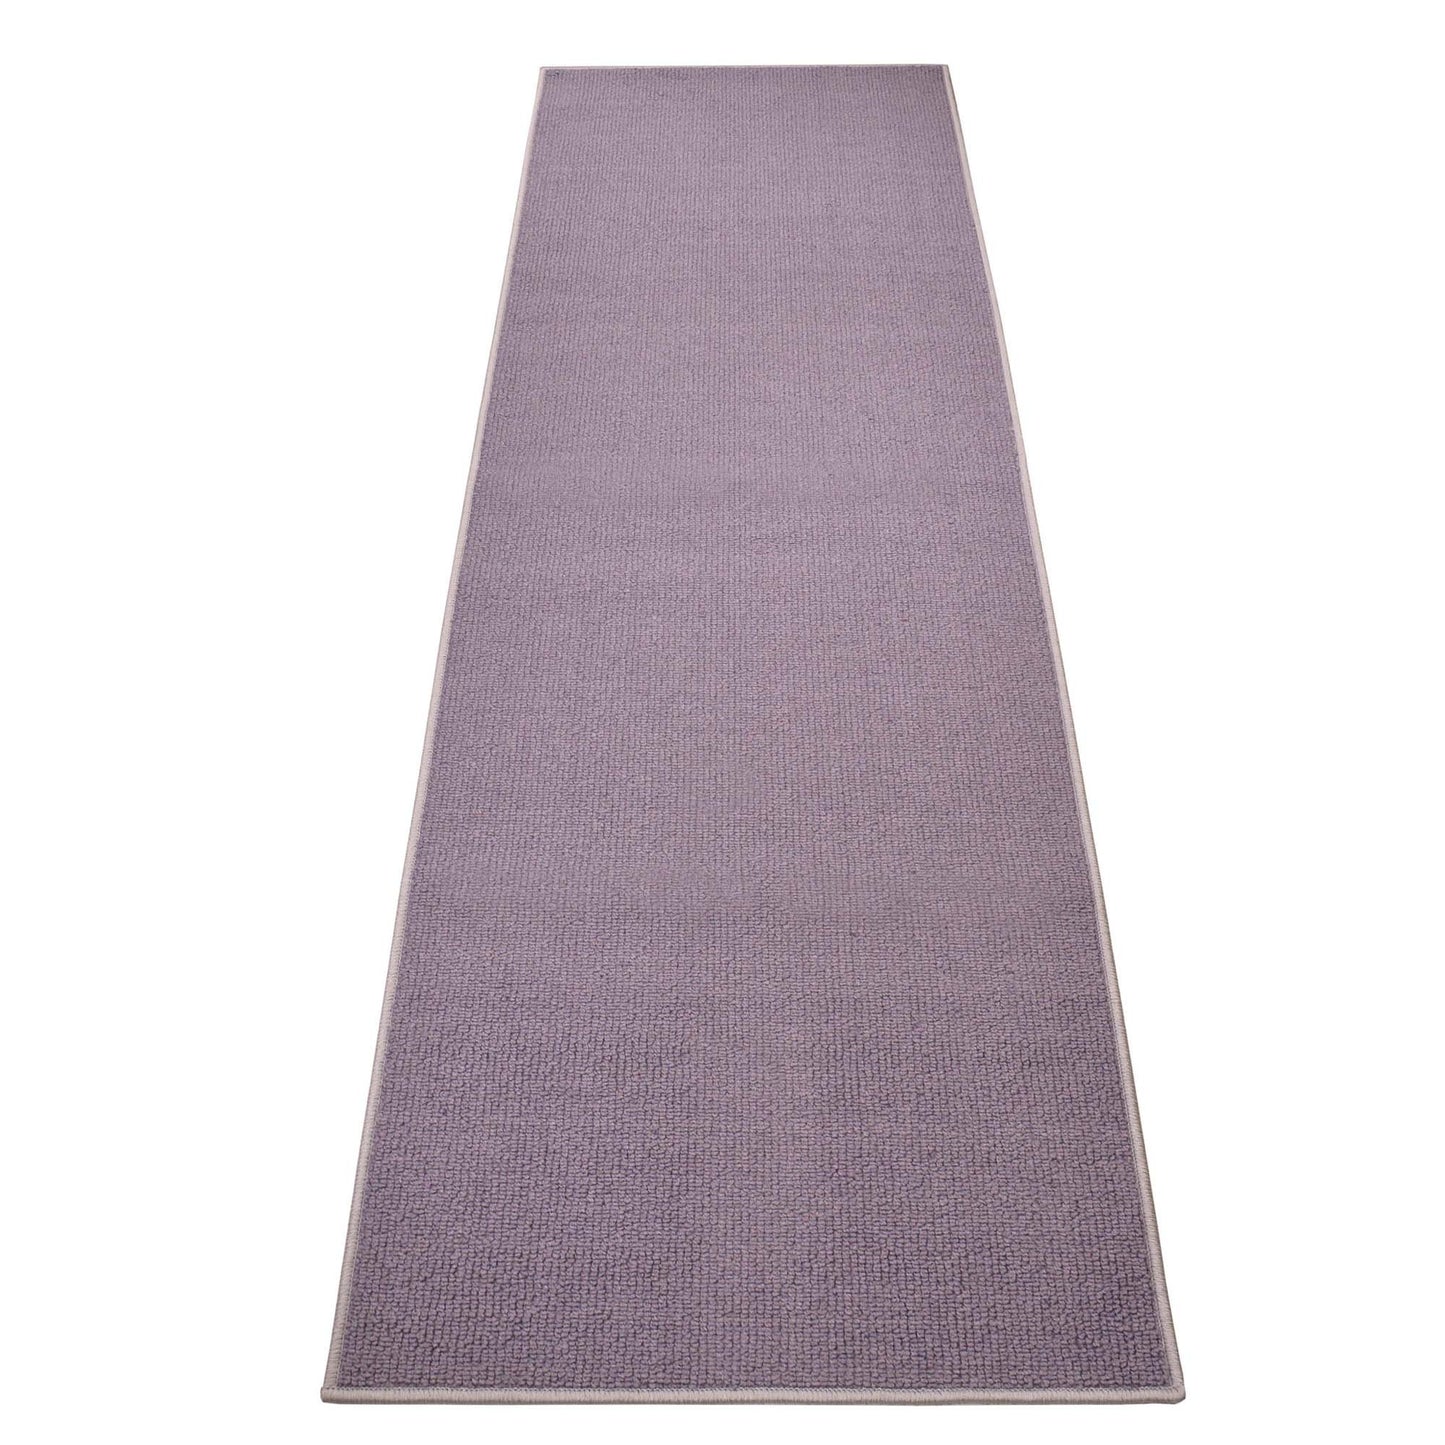 Machine Washable Custom Size Runner Rug Berber Solid Grey Skid Resistant Cut To Size Area rug Runners Customize By Feet and 26 inch Width